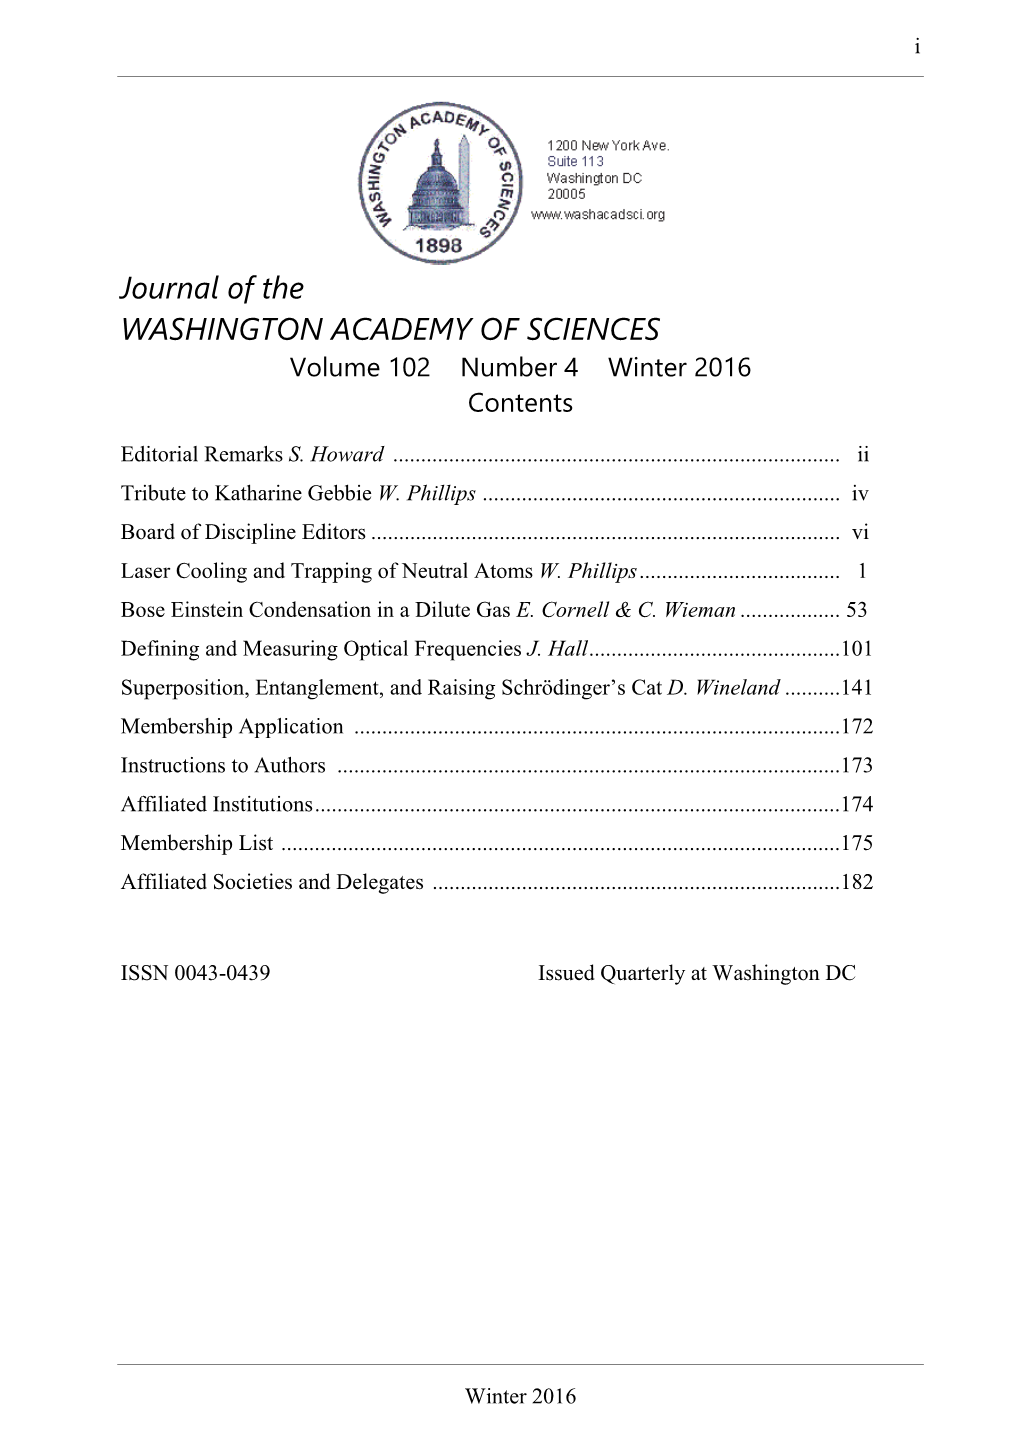 Journal of the WASHINGTON ACADEMY of SCIENCES Volume 102 Number 4 Winter 2016 Contents